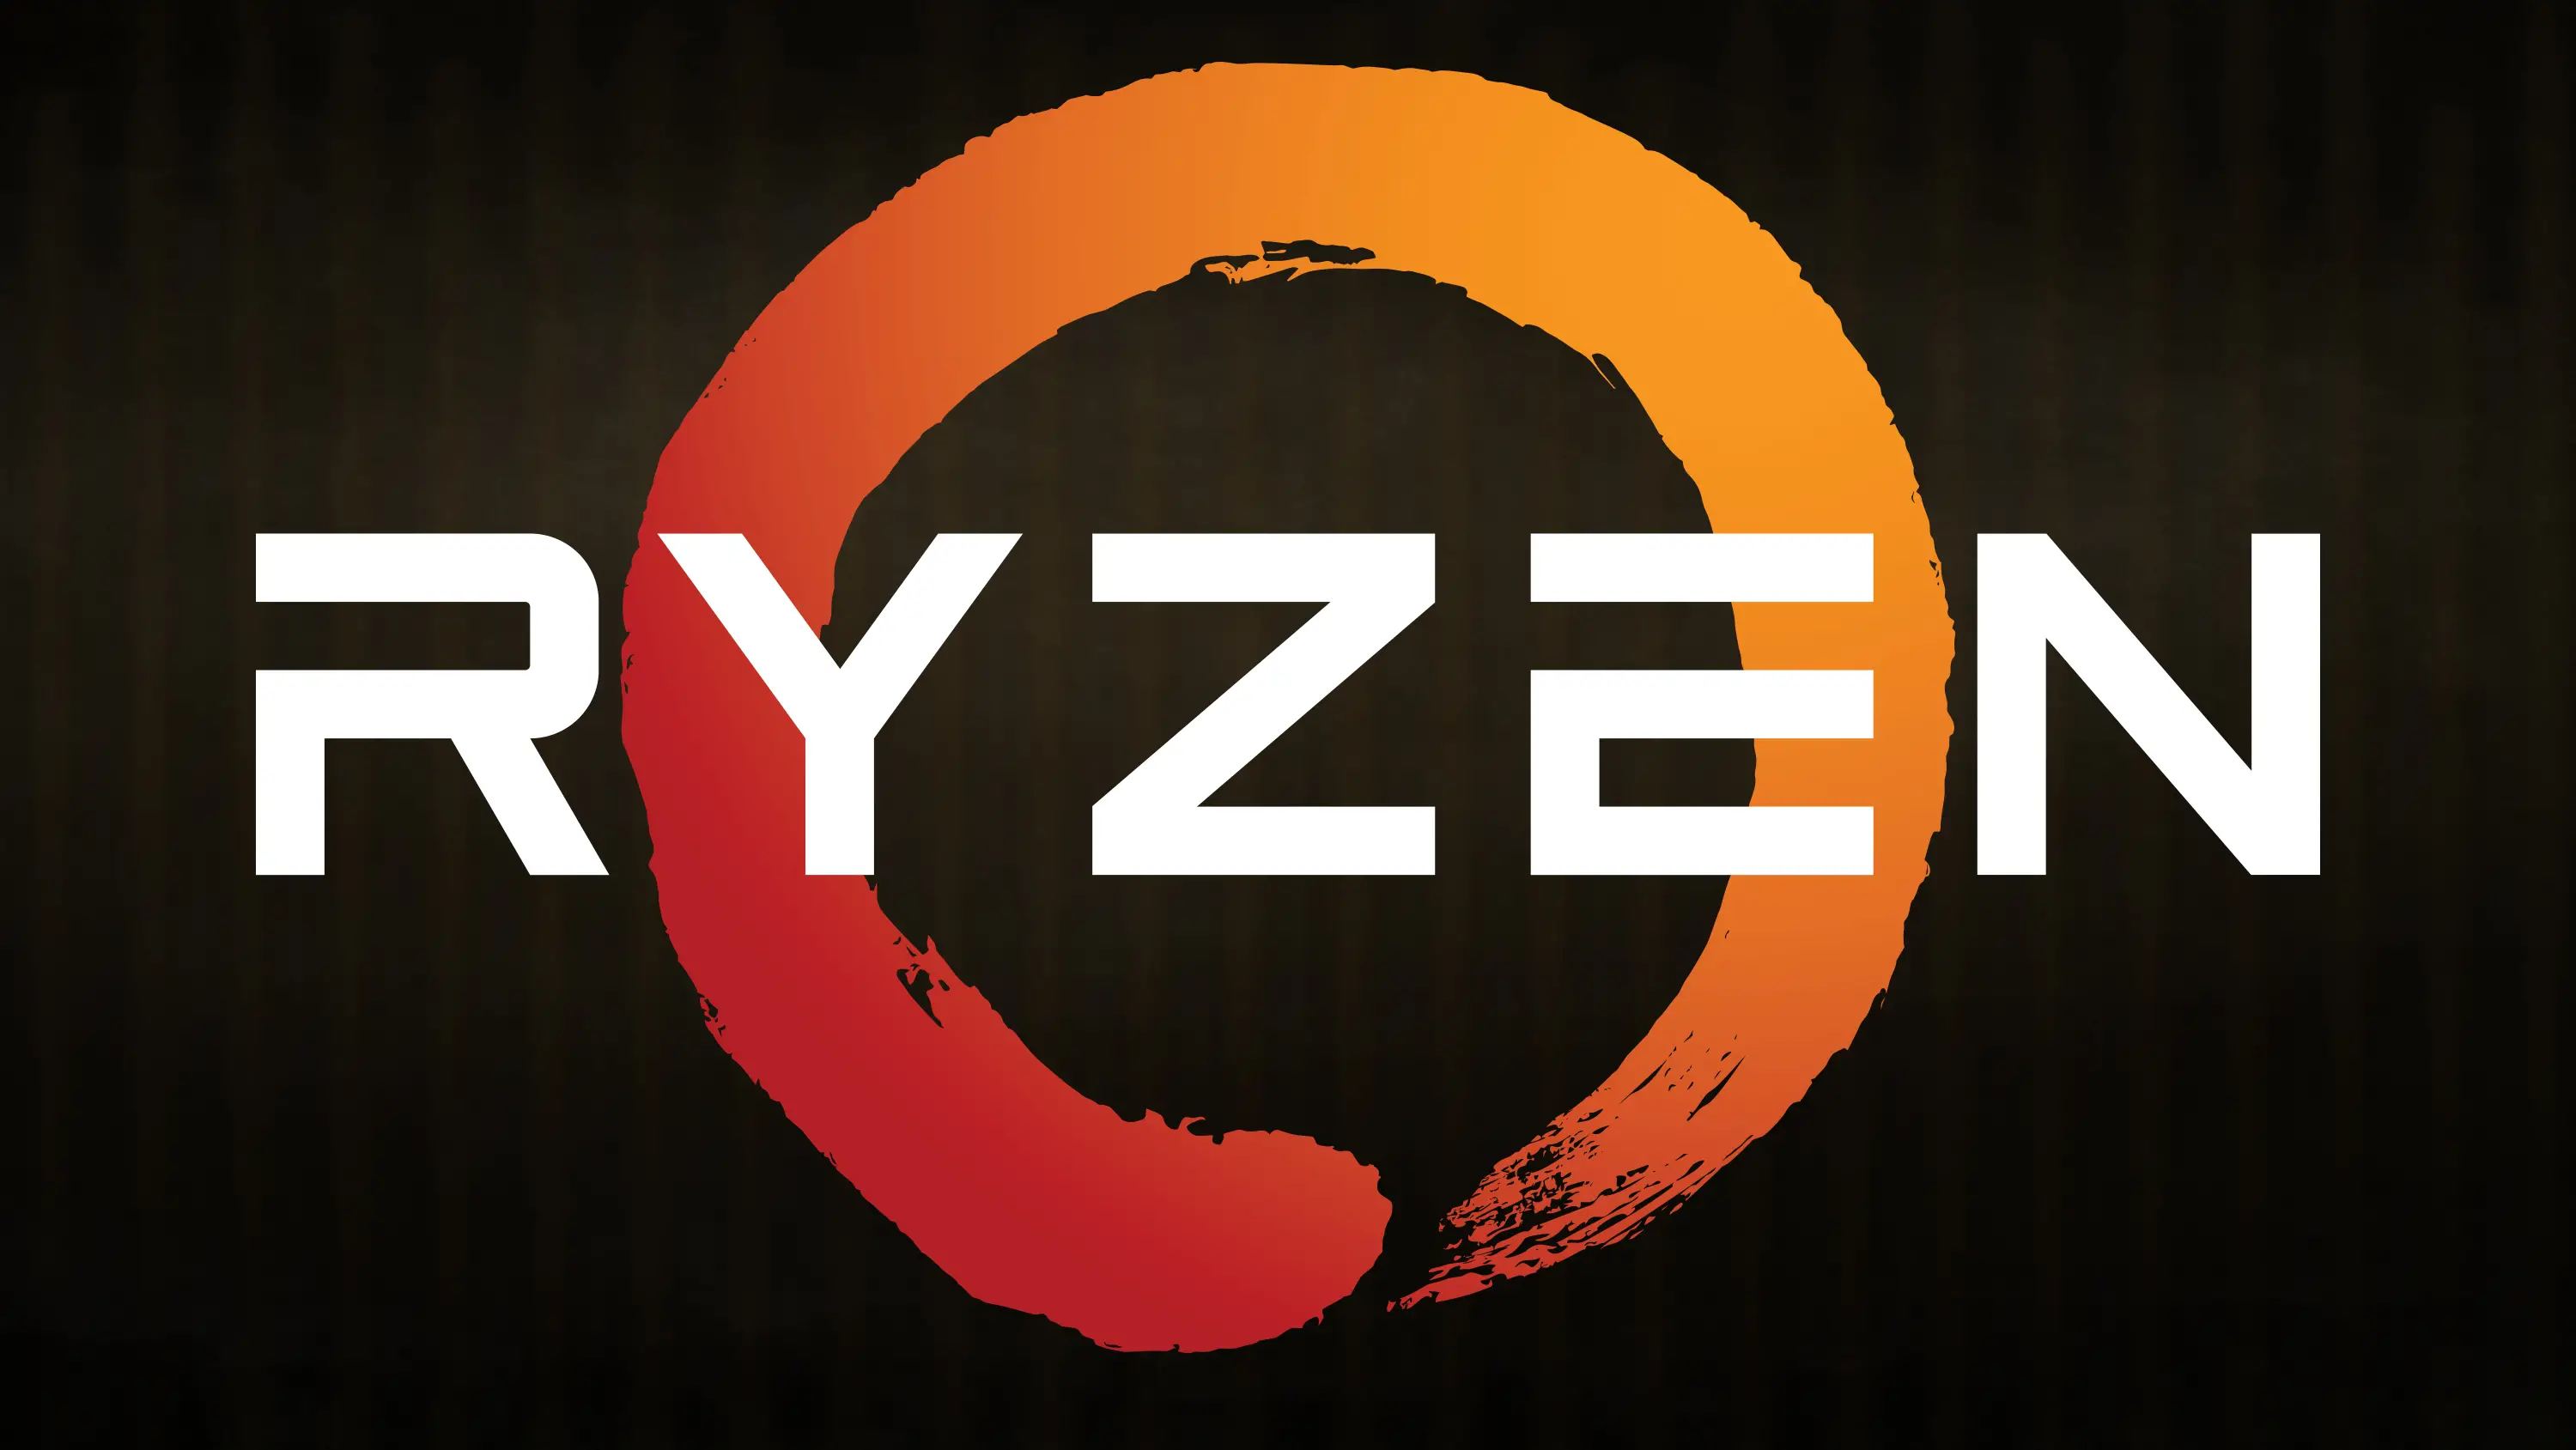 Amd Ryzen Logo Png Its High Quality And Easy To Use Art Klutz